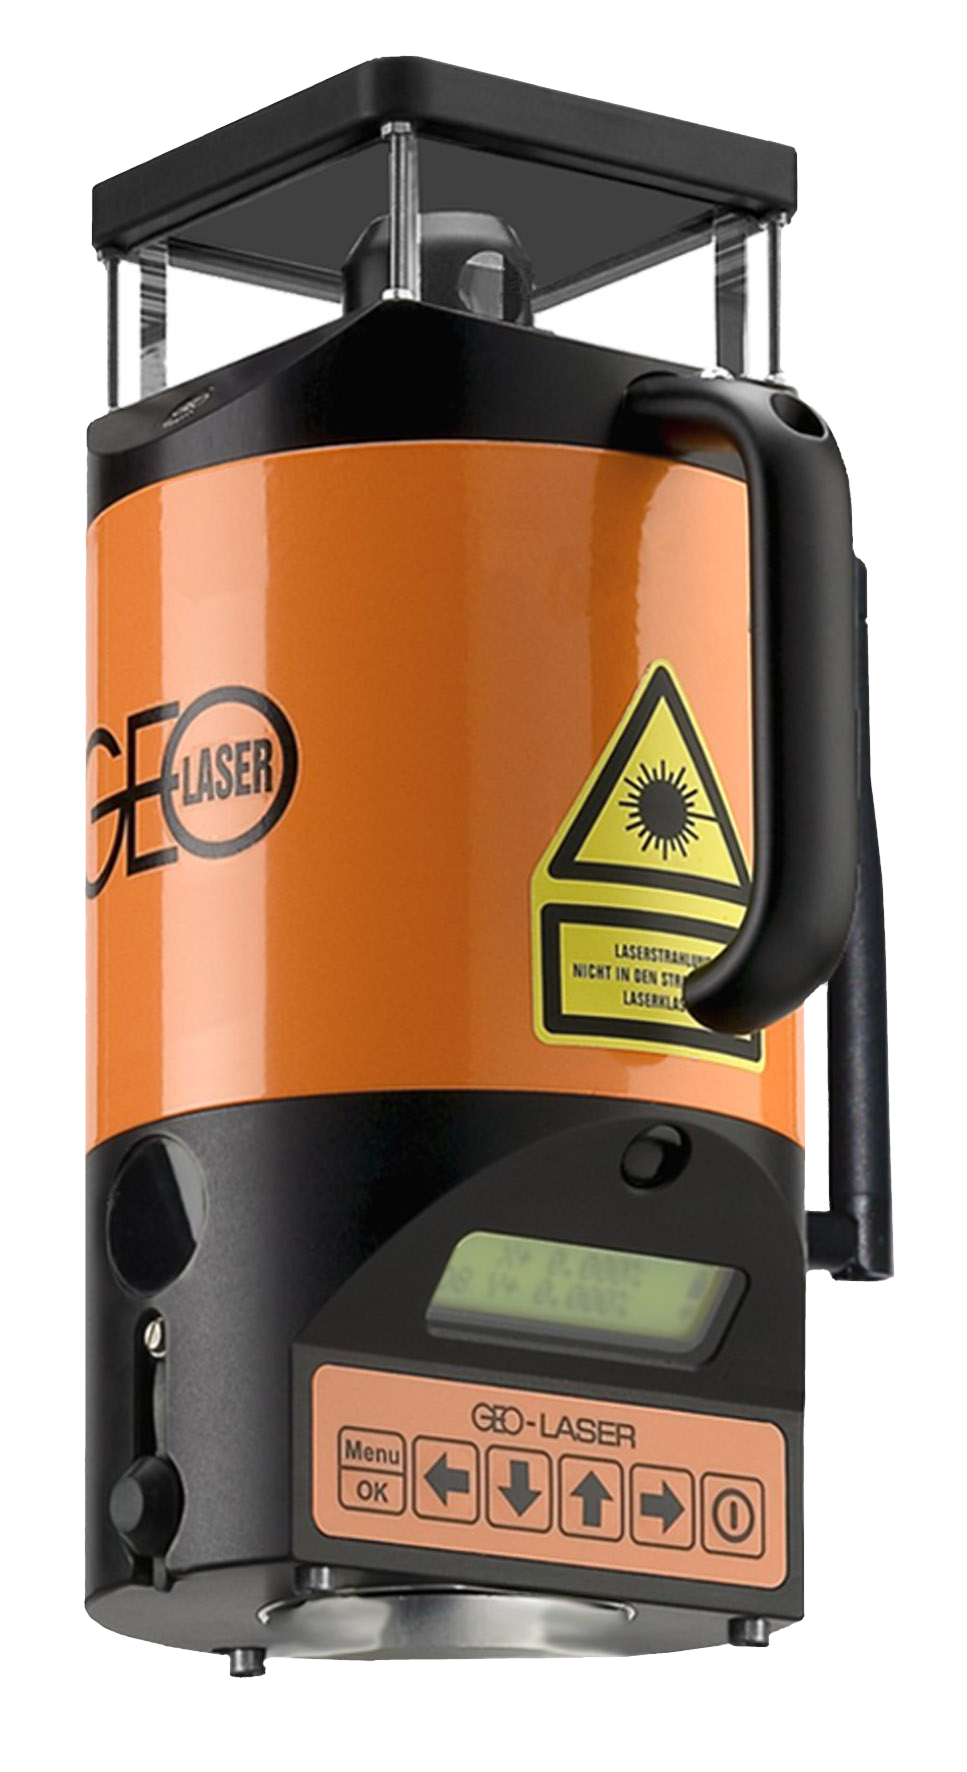 GEO-Laser RL-79L Fully Automatic Rotating Laser with 1km range